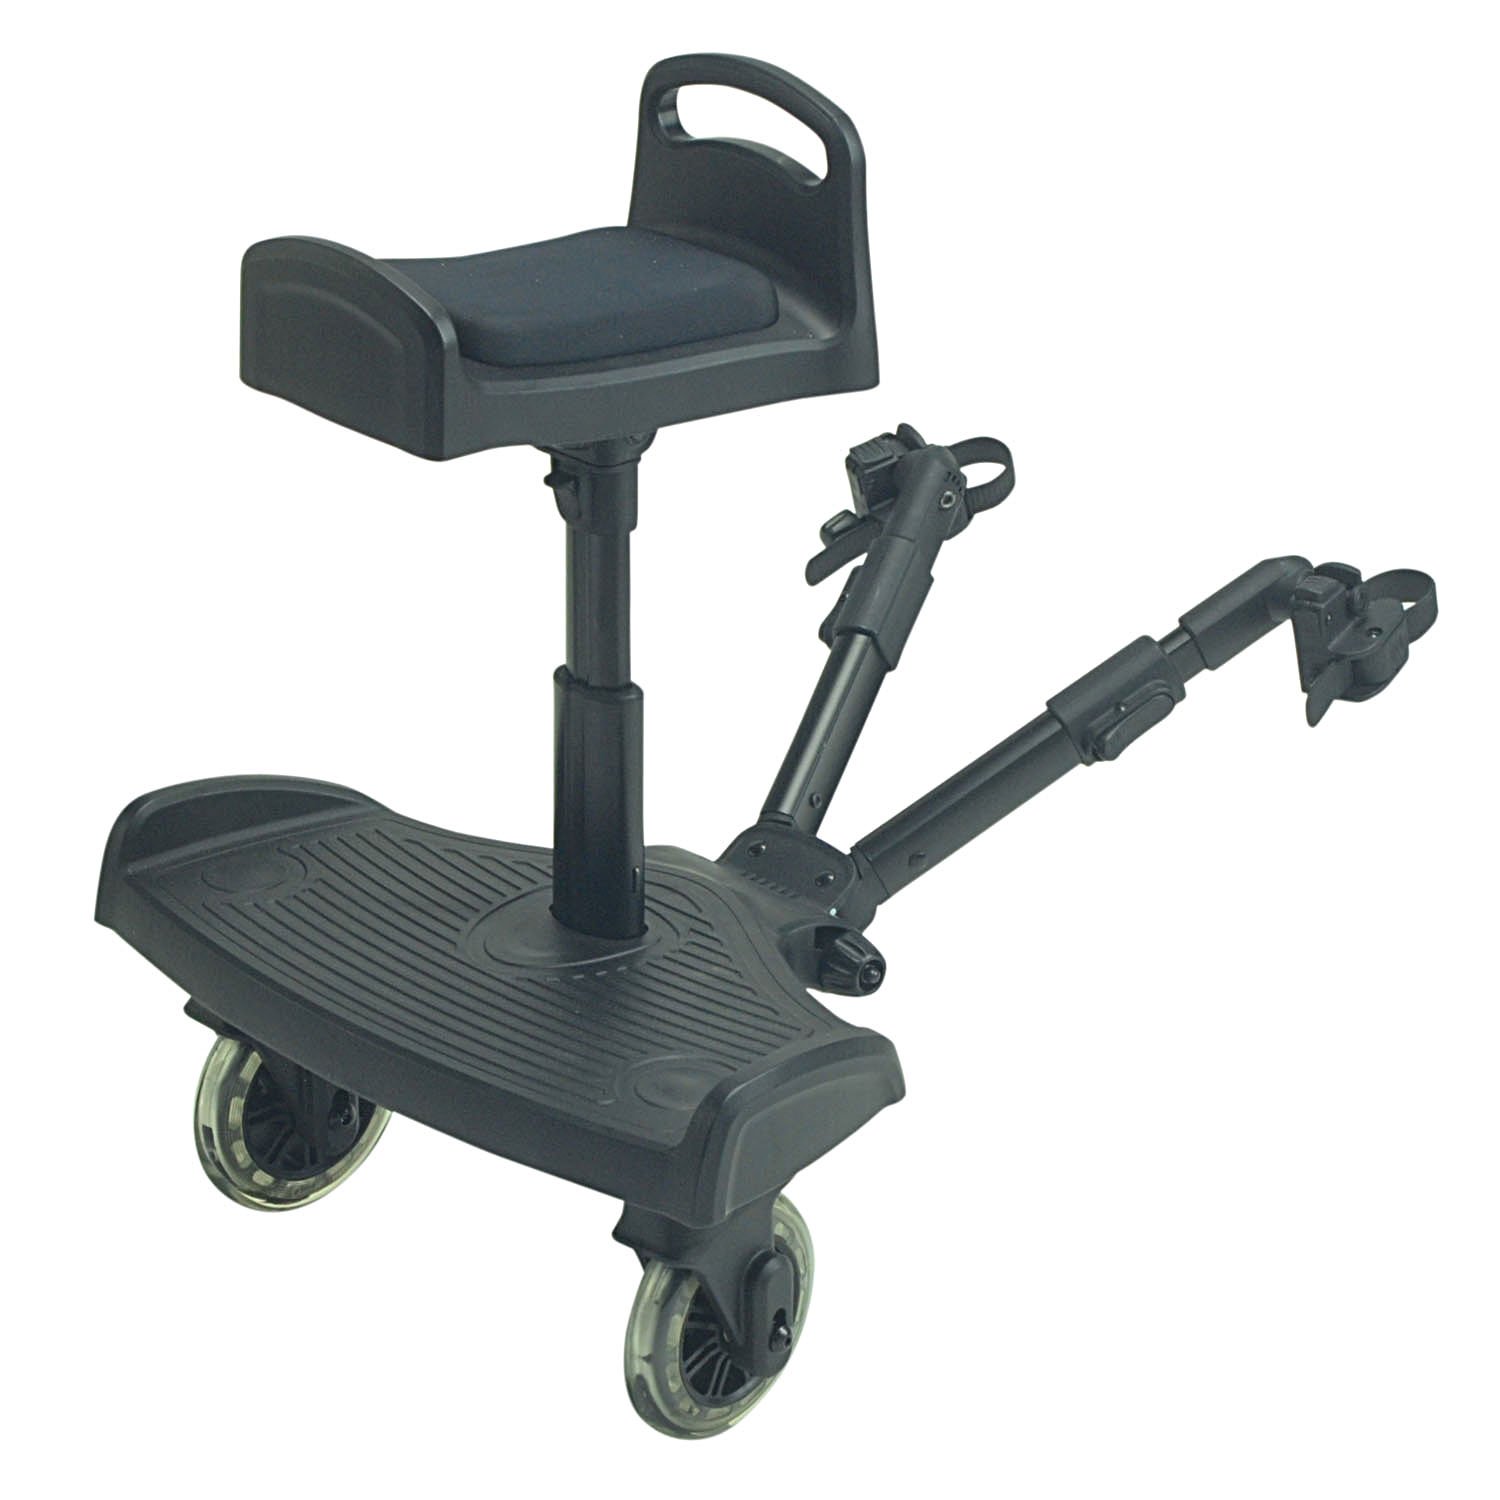 For-Your-Little-Ride On Board Compatible Travel Systems, Concord Neo